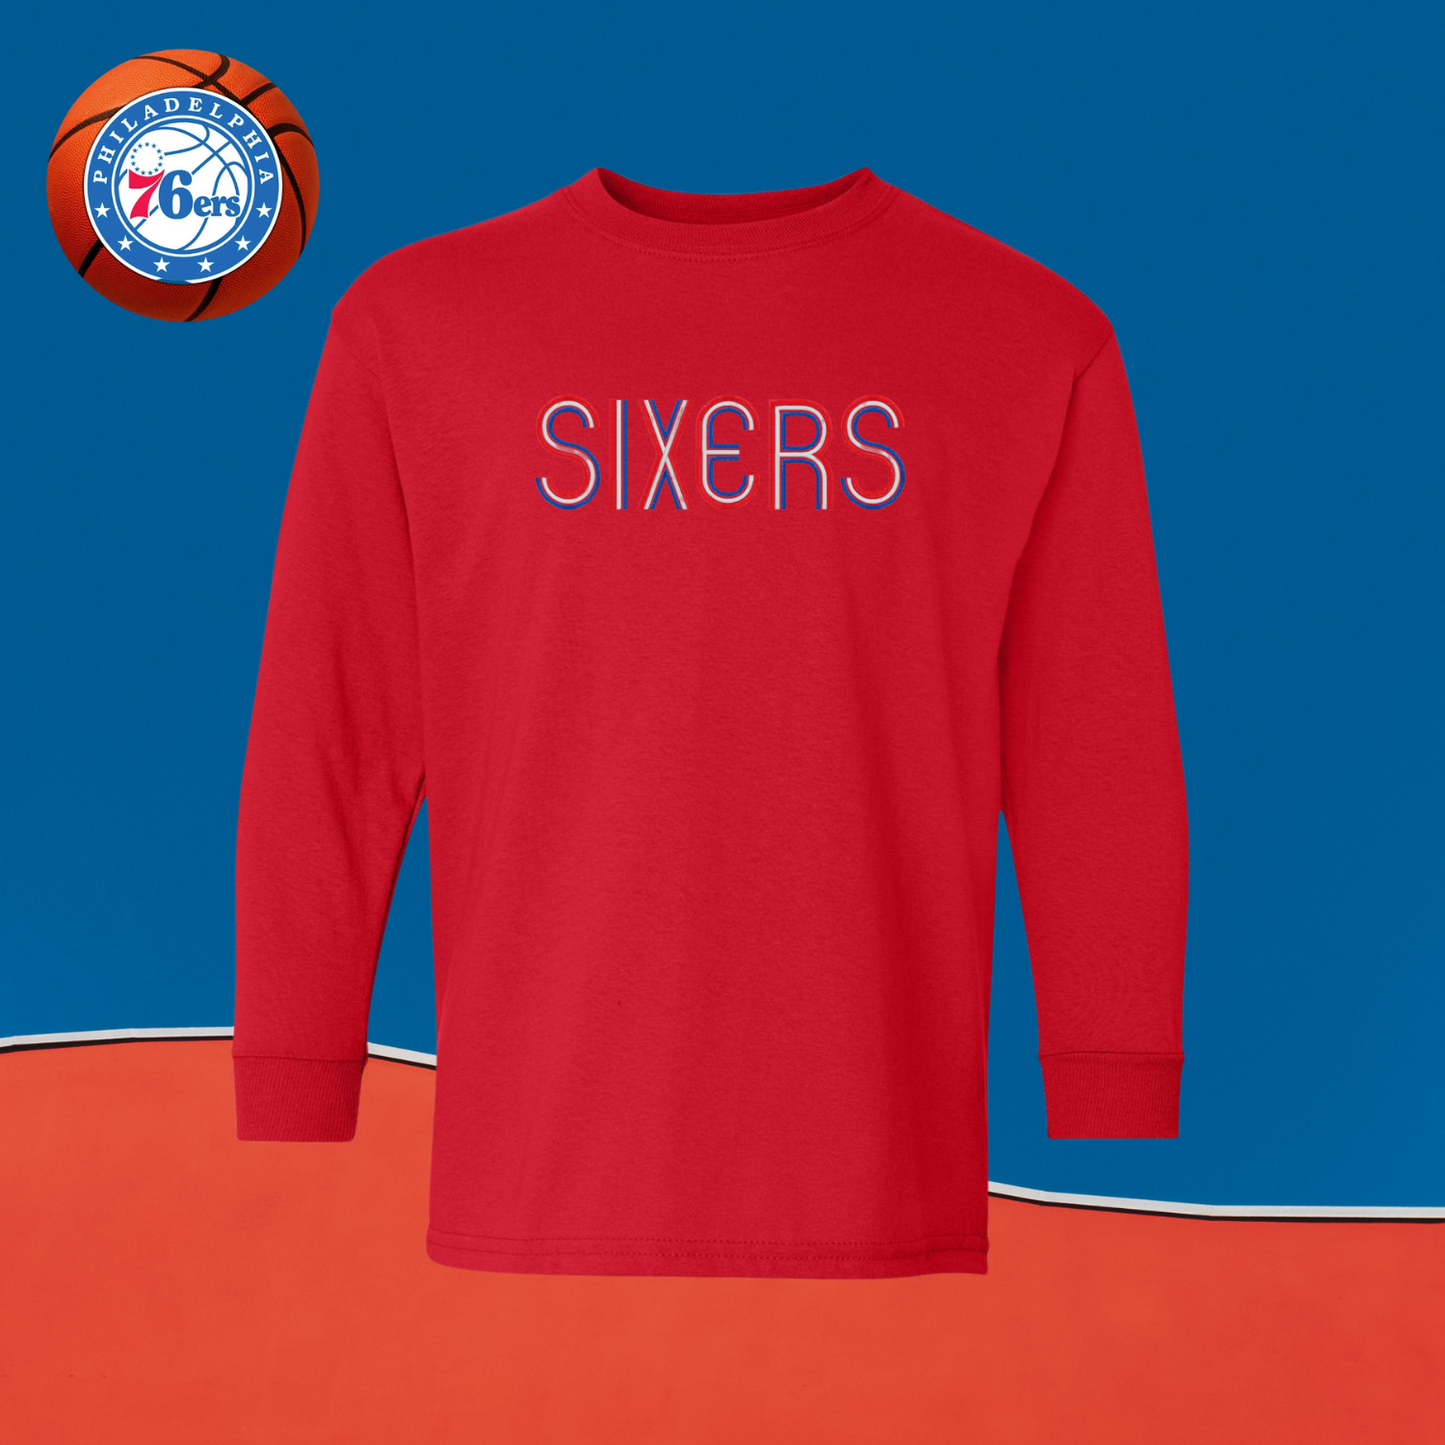 Sixers Long Sleeve T-Shirt ❤️🤍💙 Tri Color Logo